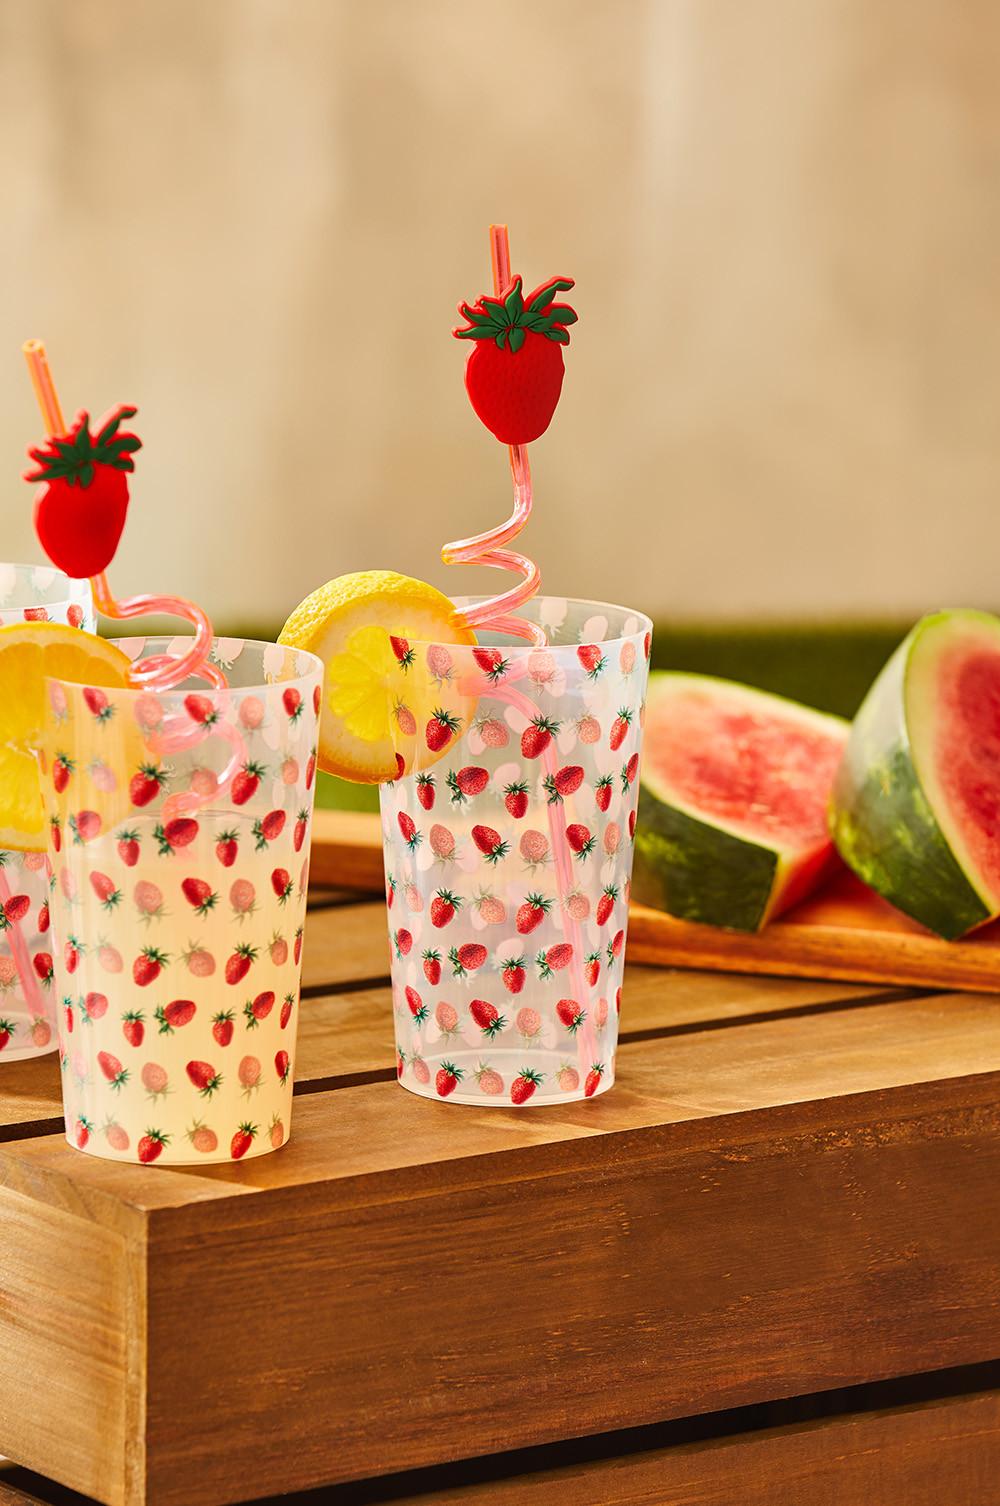 Strawberry print plastic red reusable straws, matching cups